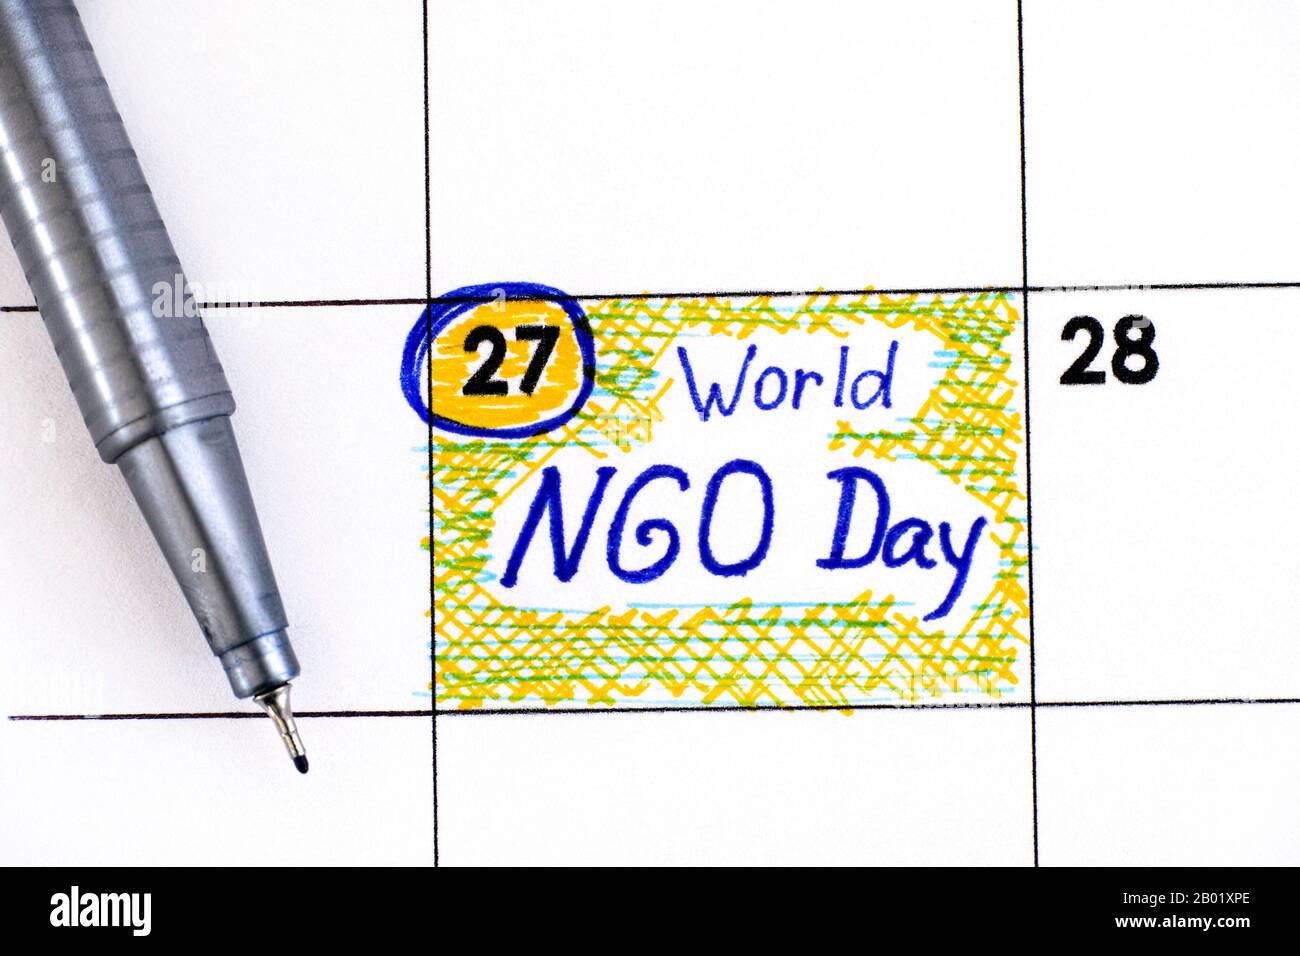 Reminder World NGO Day in calendar with pen. February 27. Stock Photo